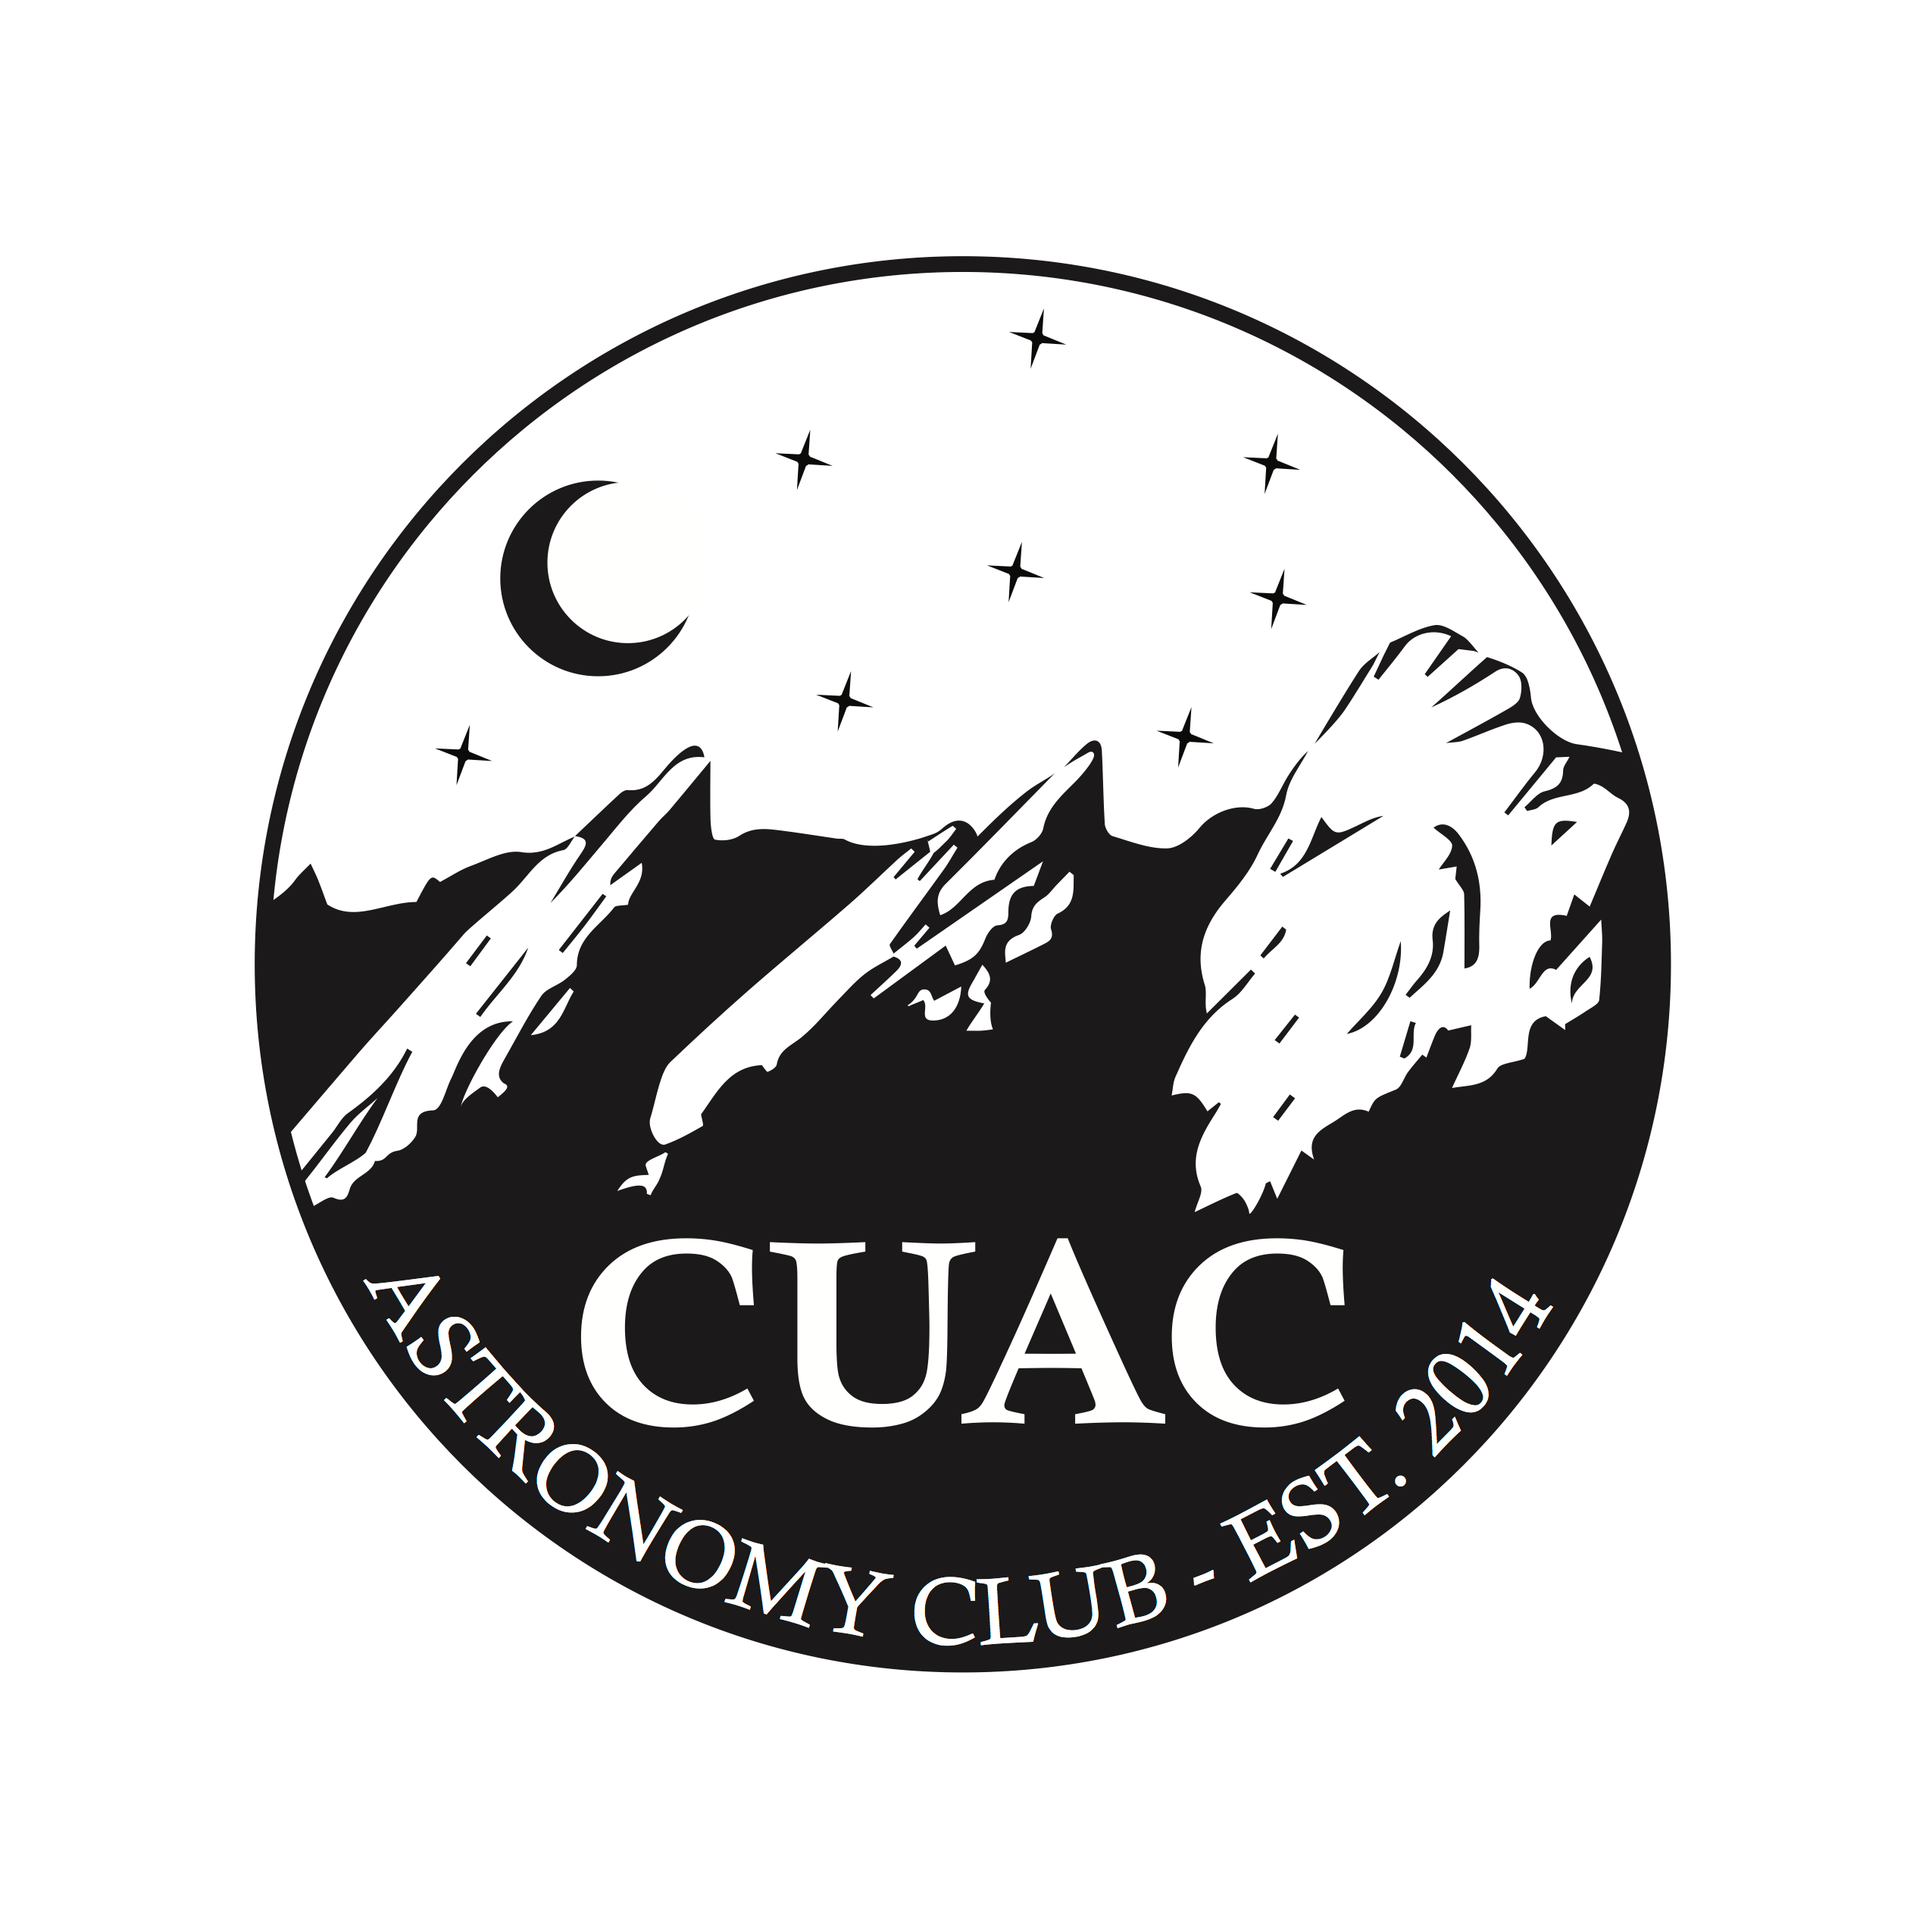 Club at CU Boulder. Meeting weekly to explore the cosmos and the constellations. Events include observation nights and dark sky trips #keeplookingup